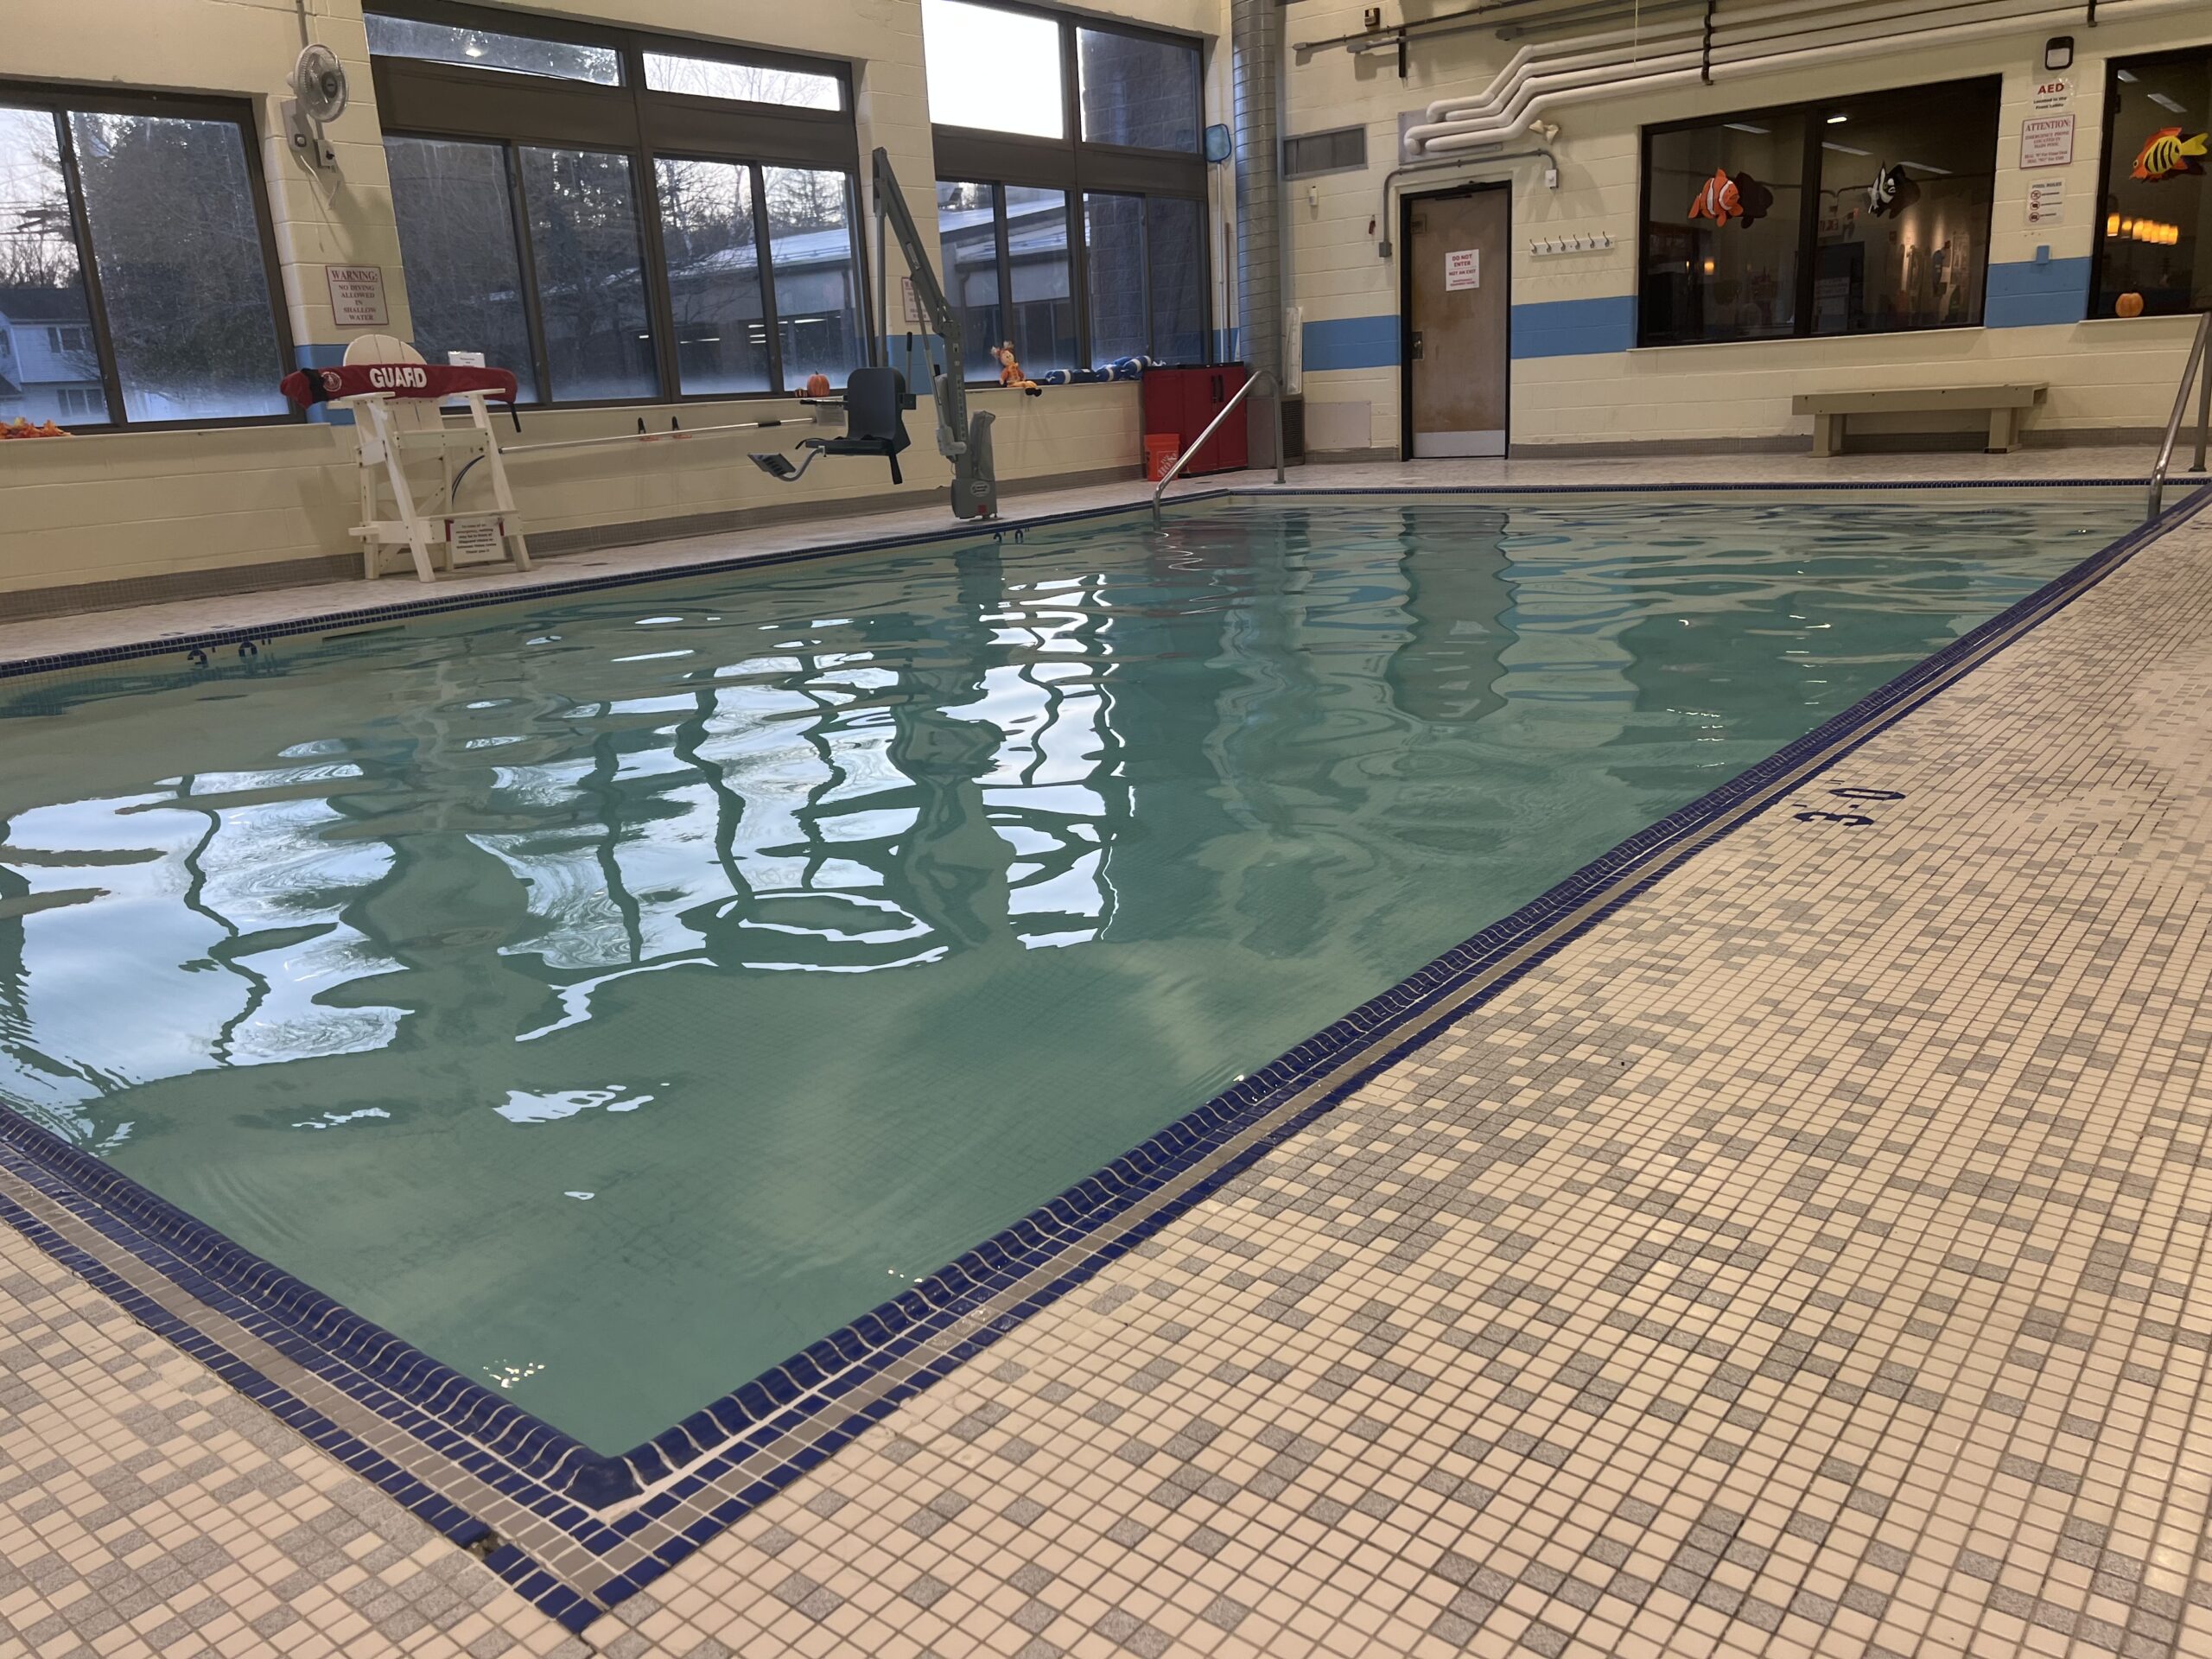 Therapy Pool at the Regional YMCA